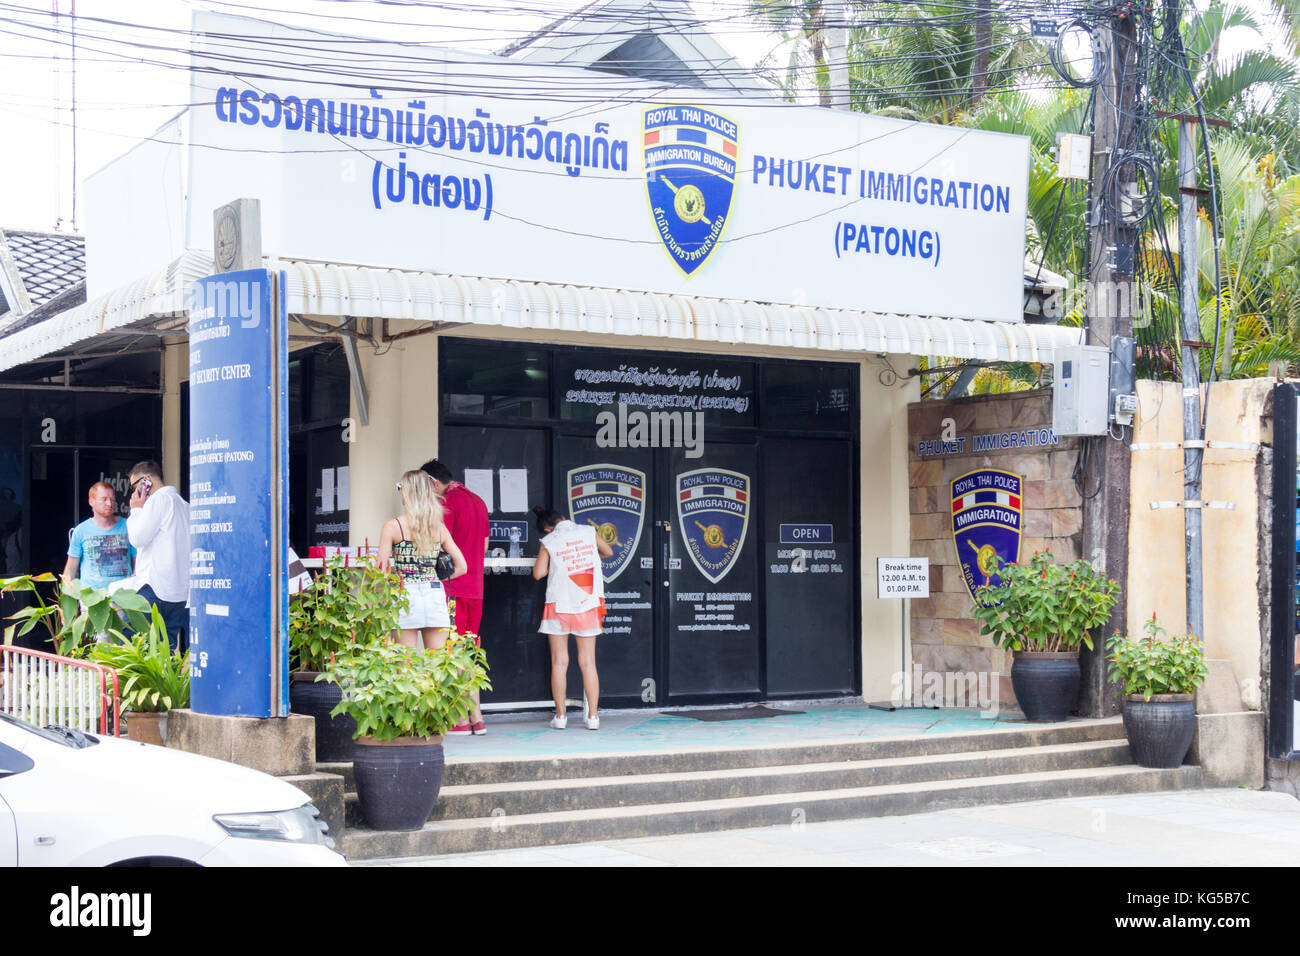 Patong branch of Phuket Immigration office, Thailand Stock Photo